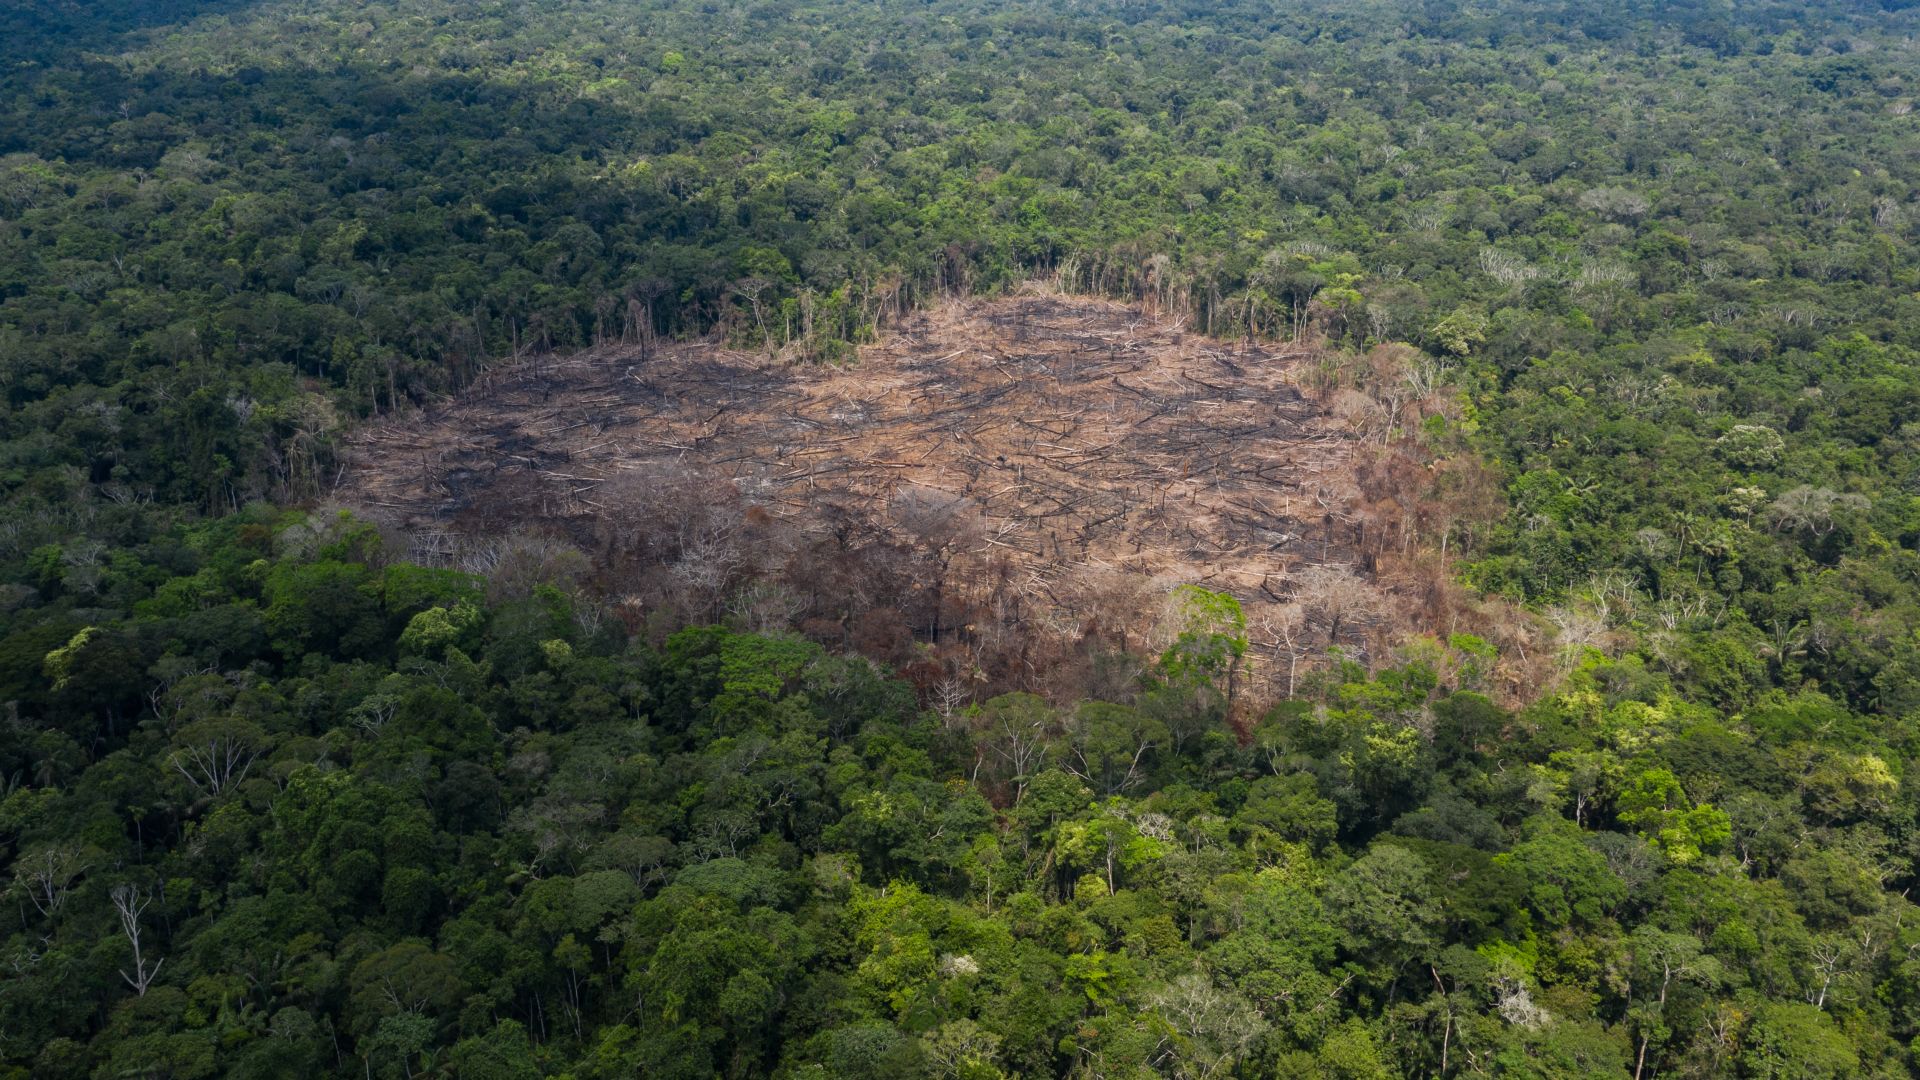 Deforestation in Chiribiquete national park, Colombia